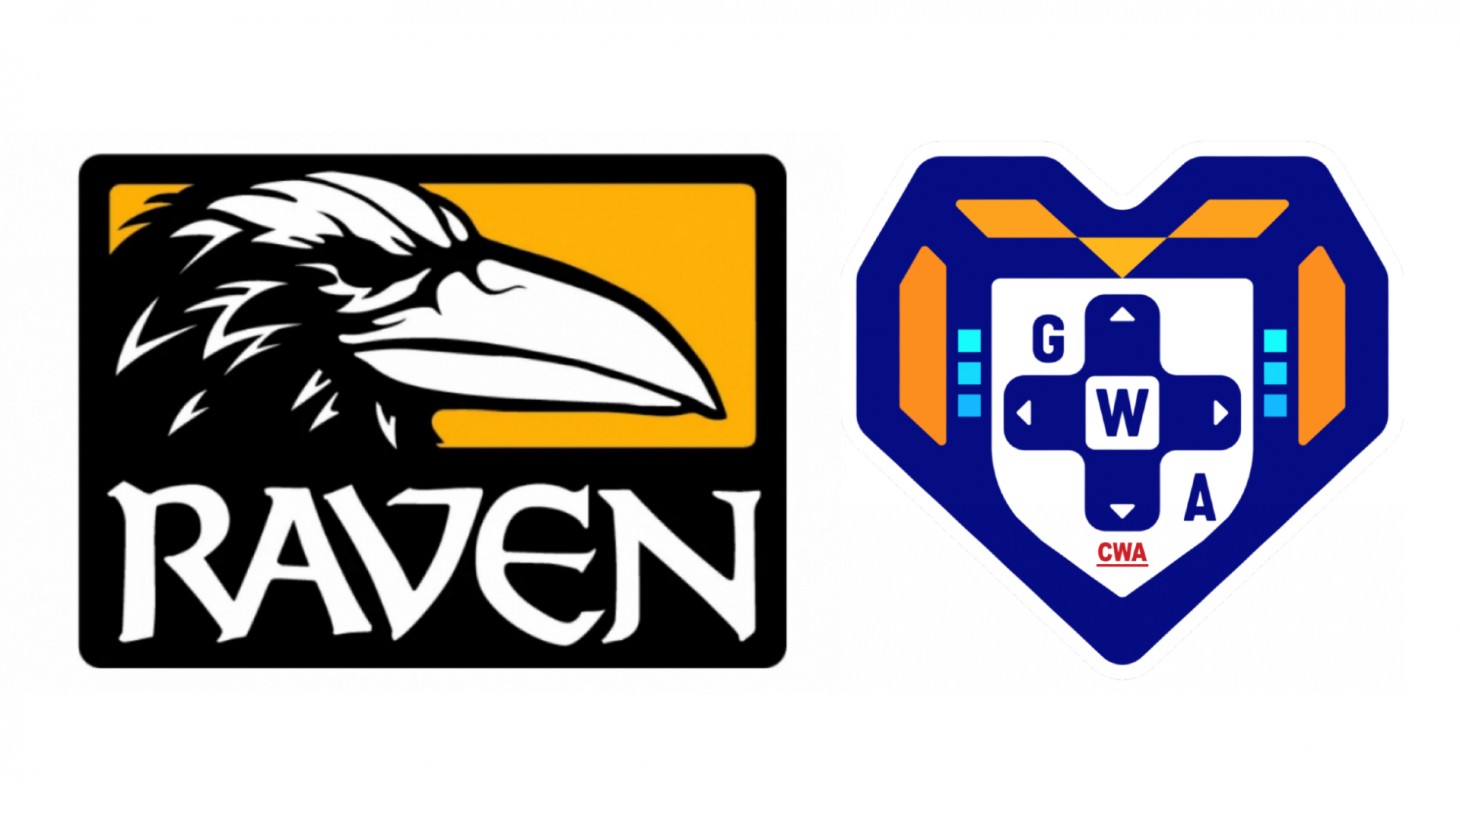 Raven Software Activision Blizzard Game Workers Alliance Union